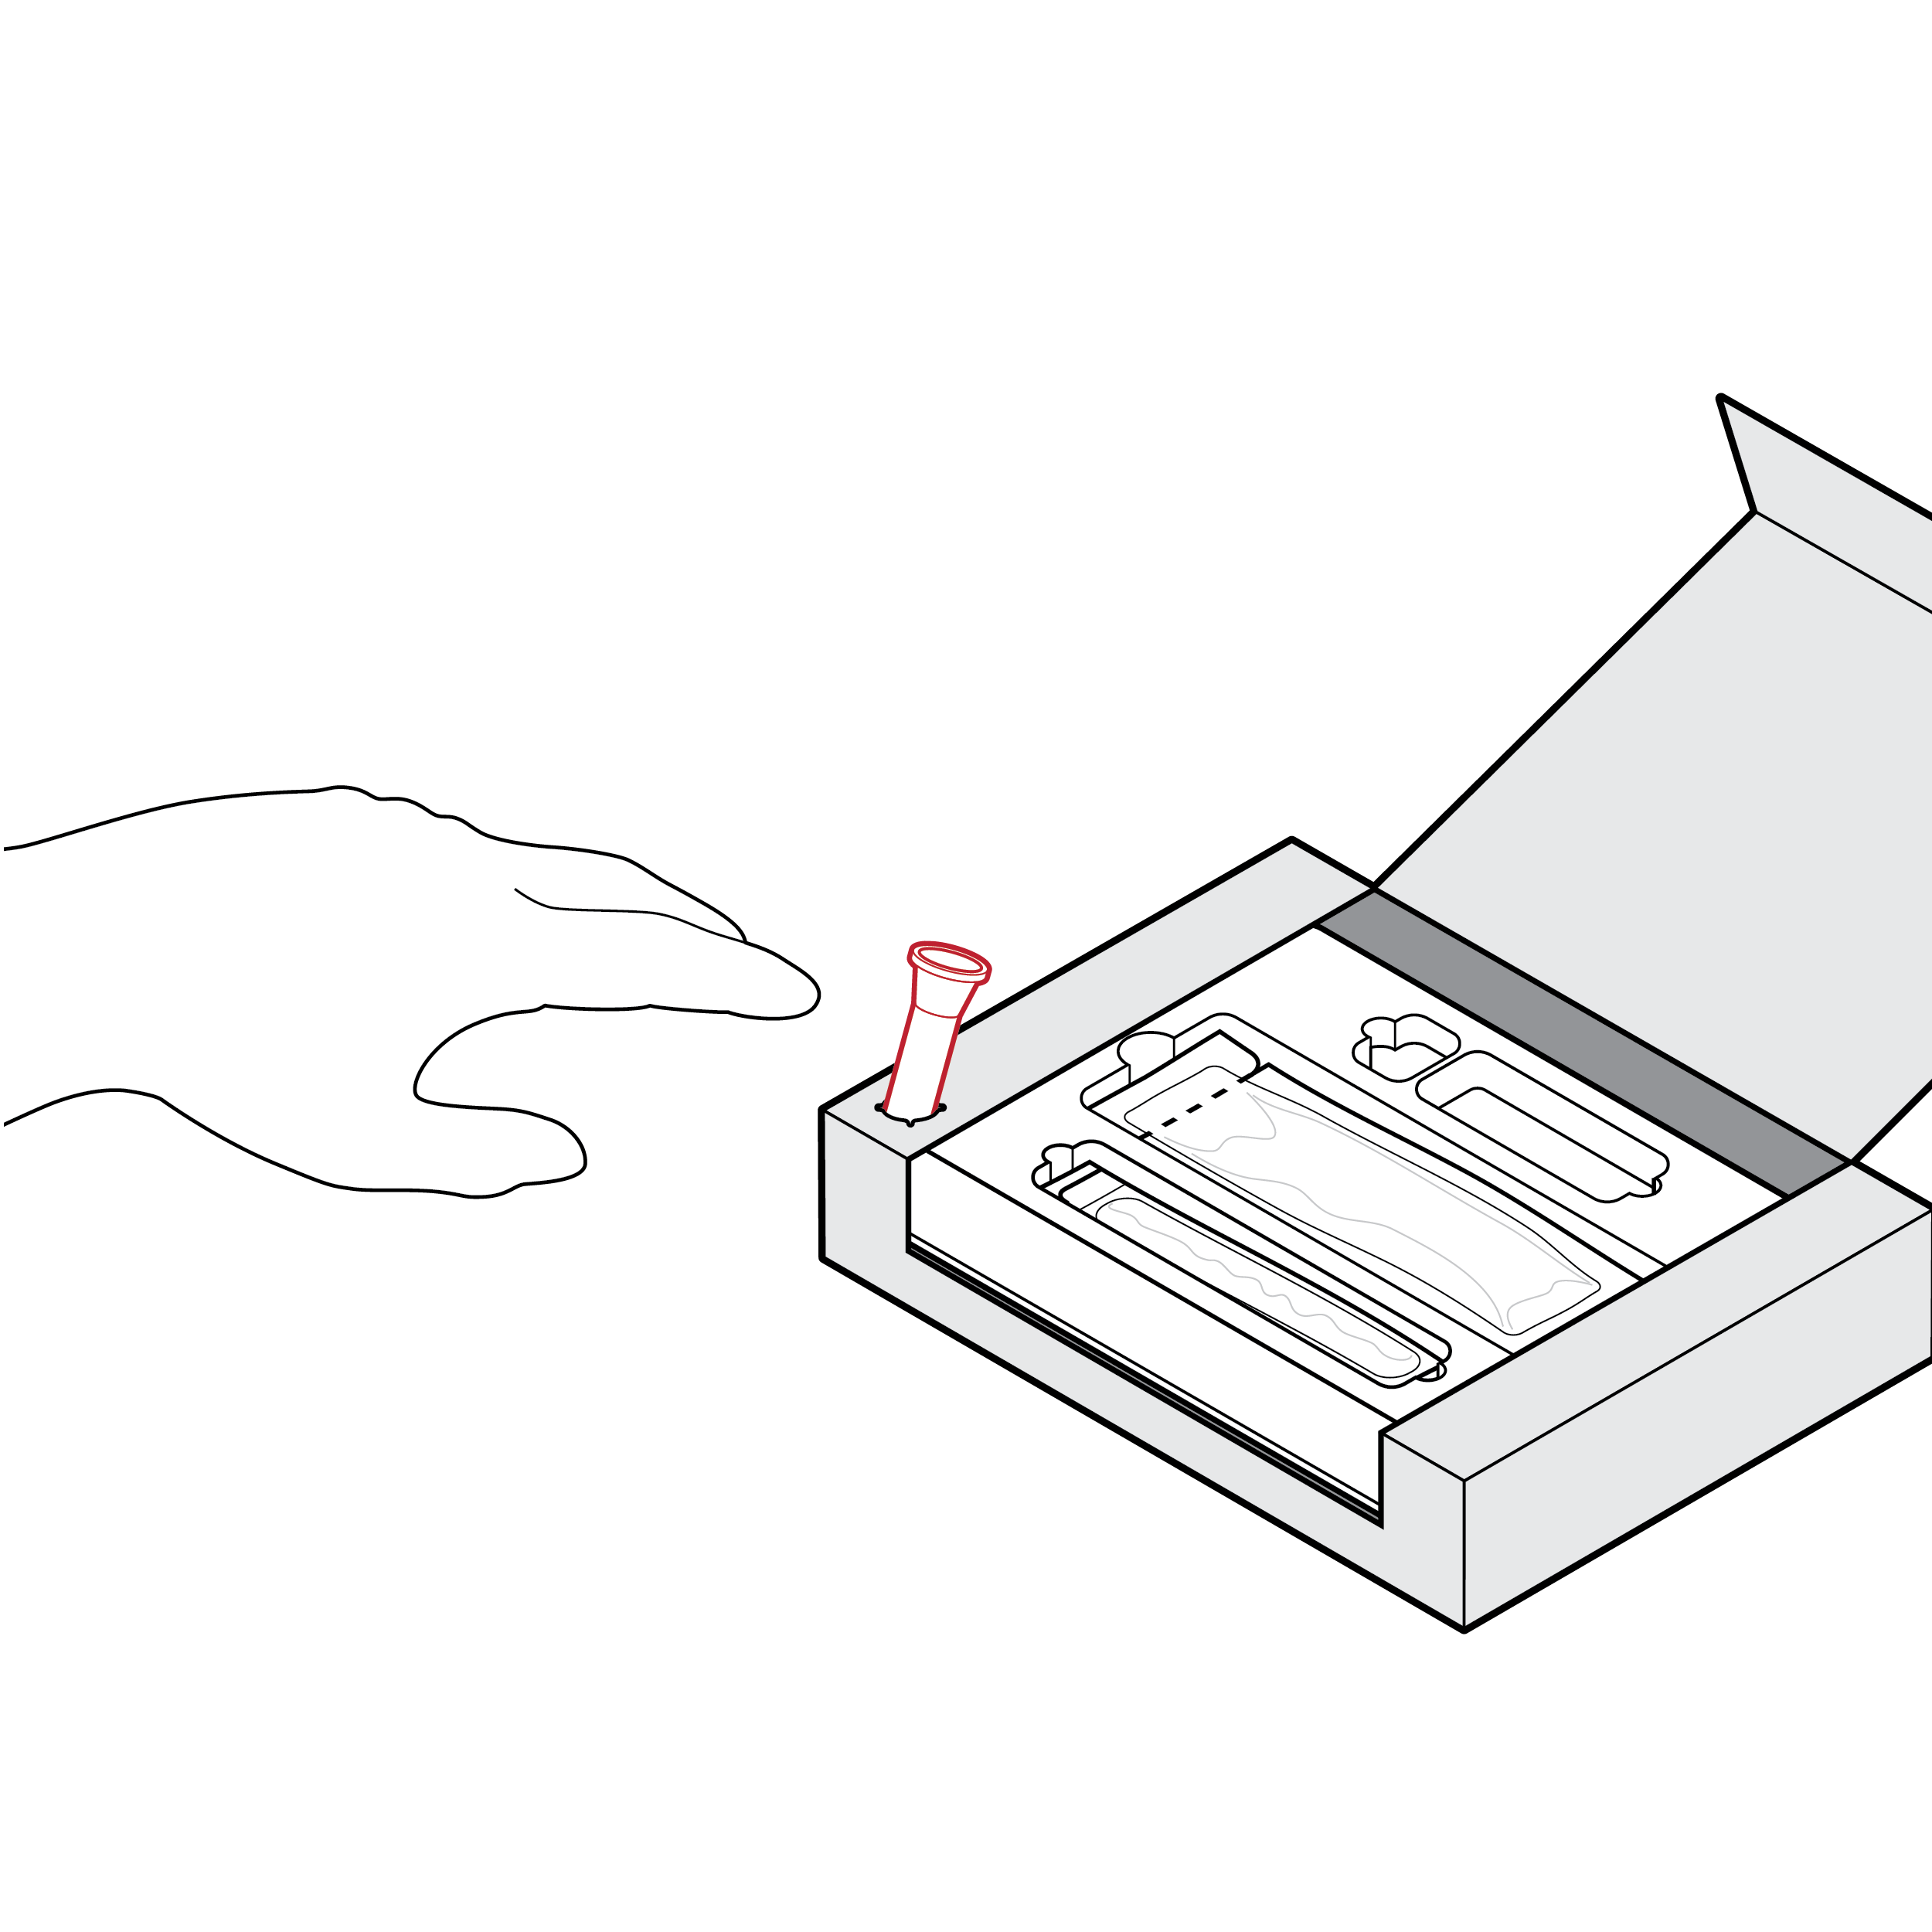 A package with fluid vial placed in front corner of box. The box has a tray with other components placed inside. A hand is shown bumping into the vial, and the vial is outlined in red to indicate a nonideal placement in the tray.